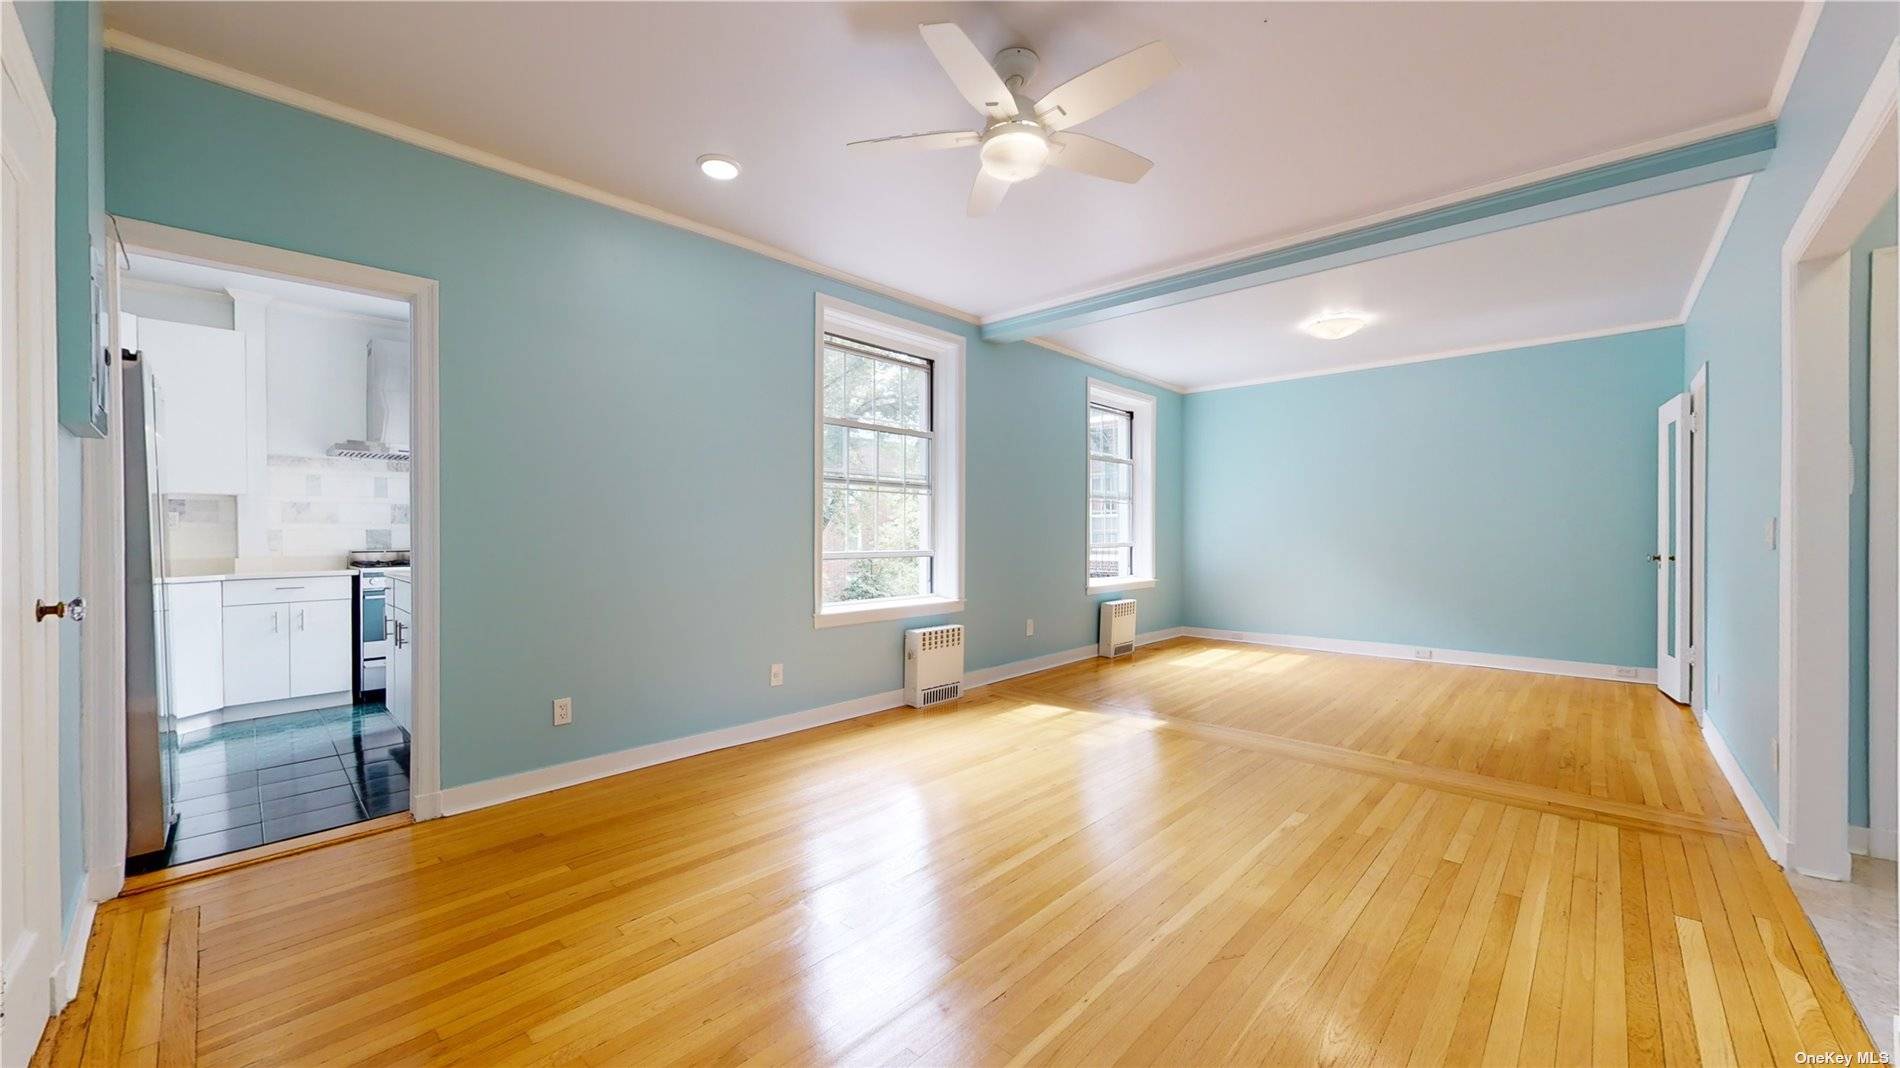 Welcome to your new home in the heart of the charming and historic Jackson Heights neighborhood !